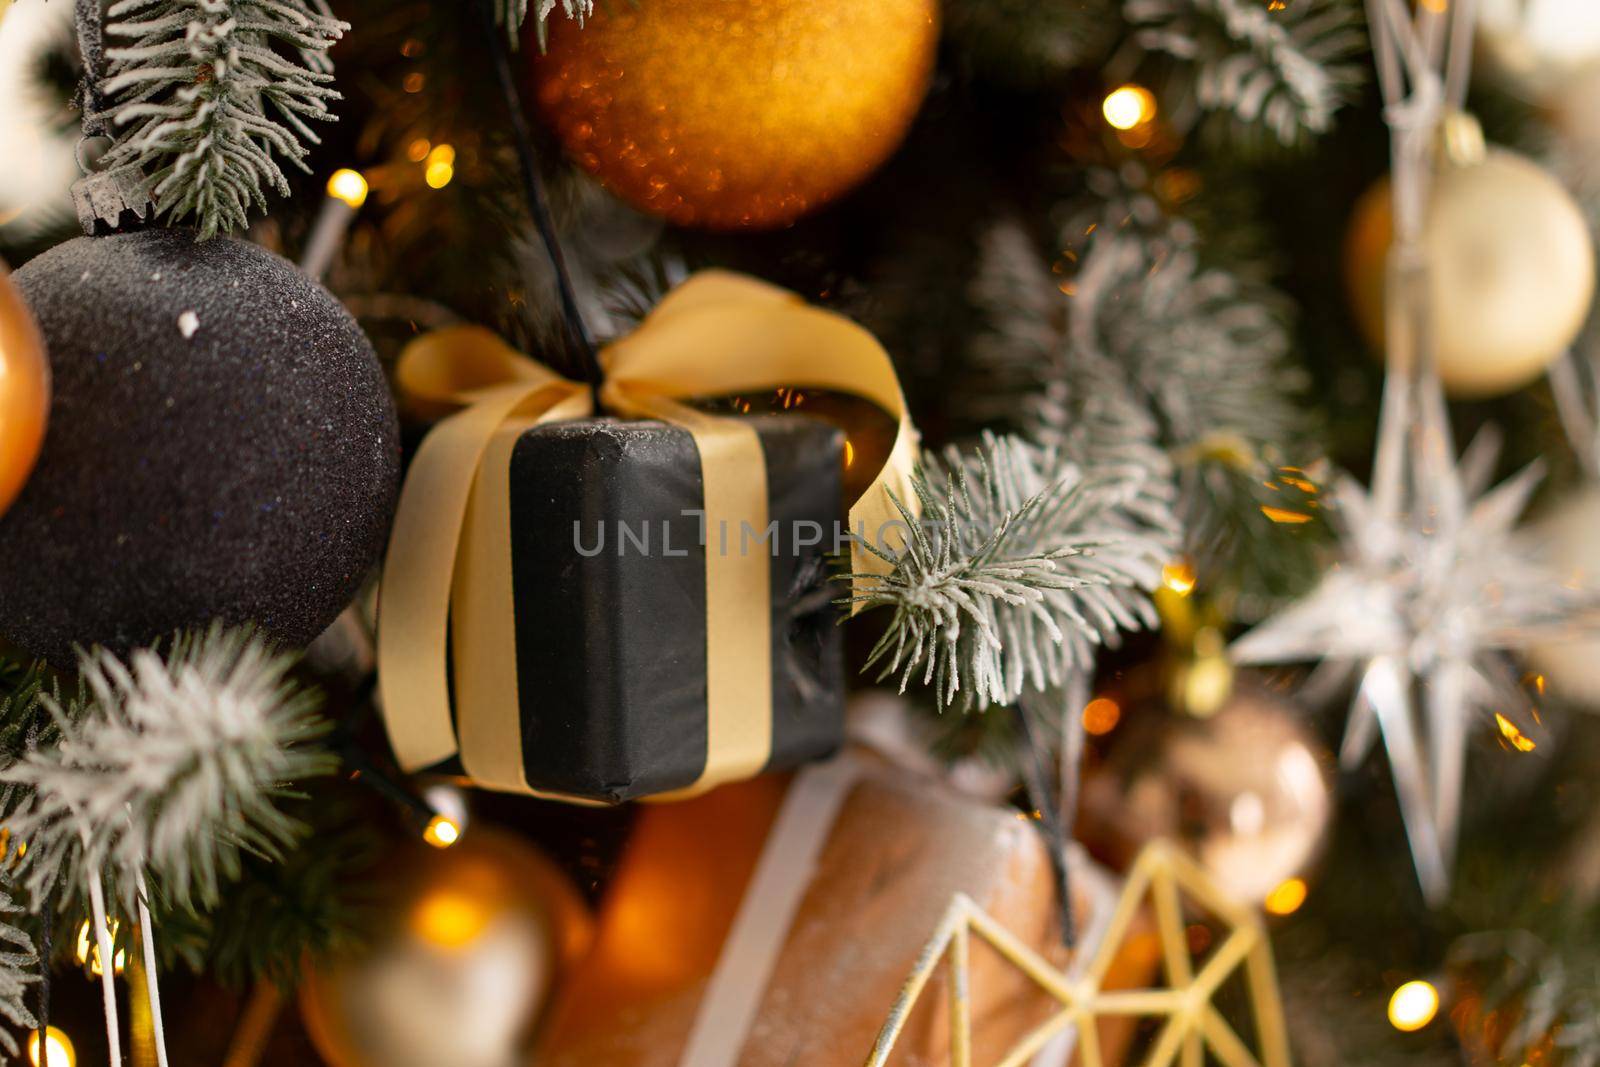 Christmas present gift box stacked close up. Holiday sale concept. Many gift box black, white, orange color with gold ribbon and light garland